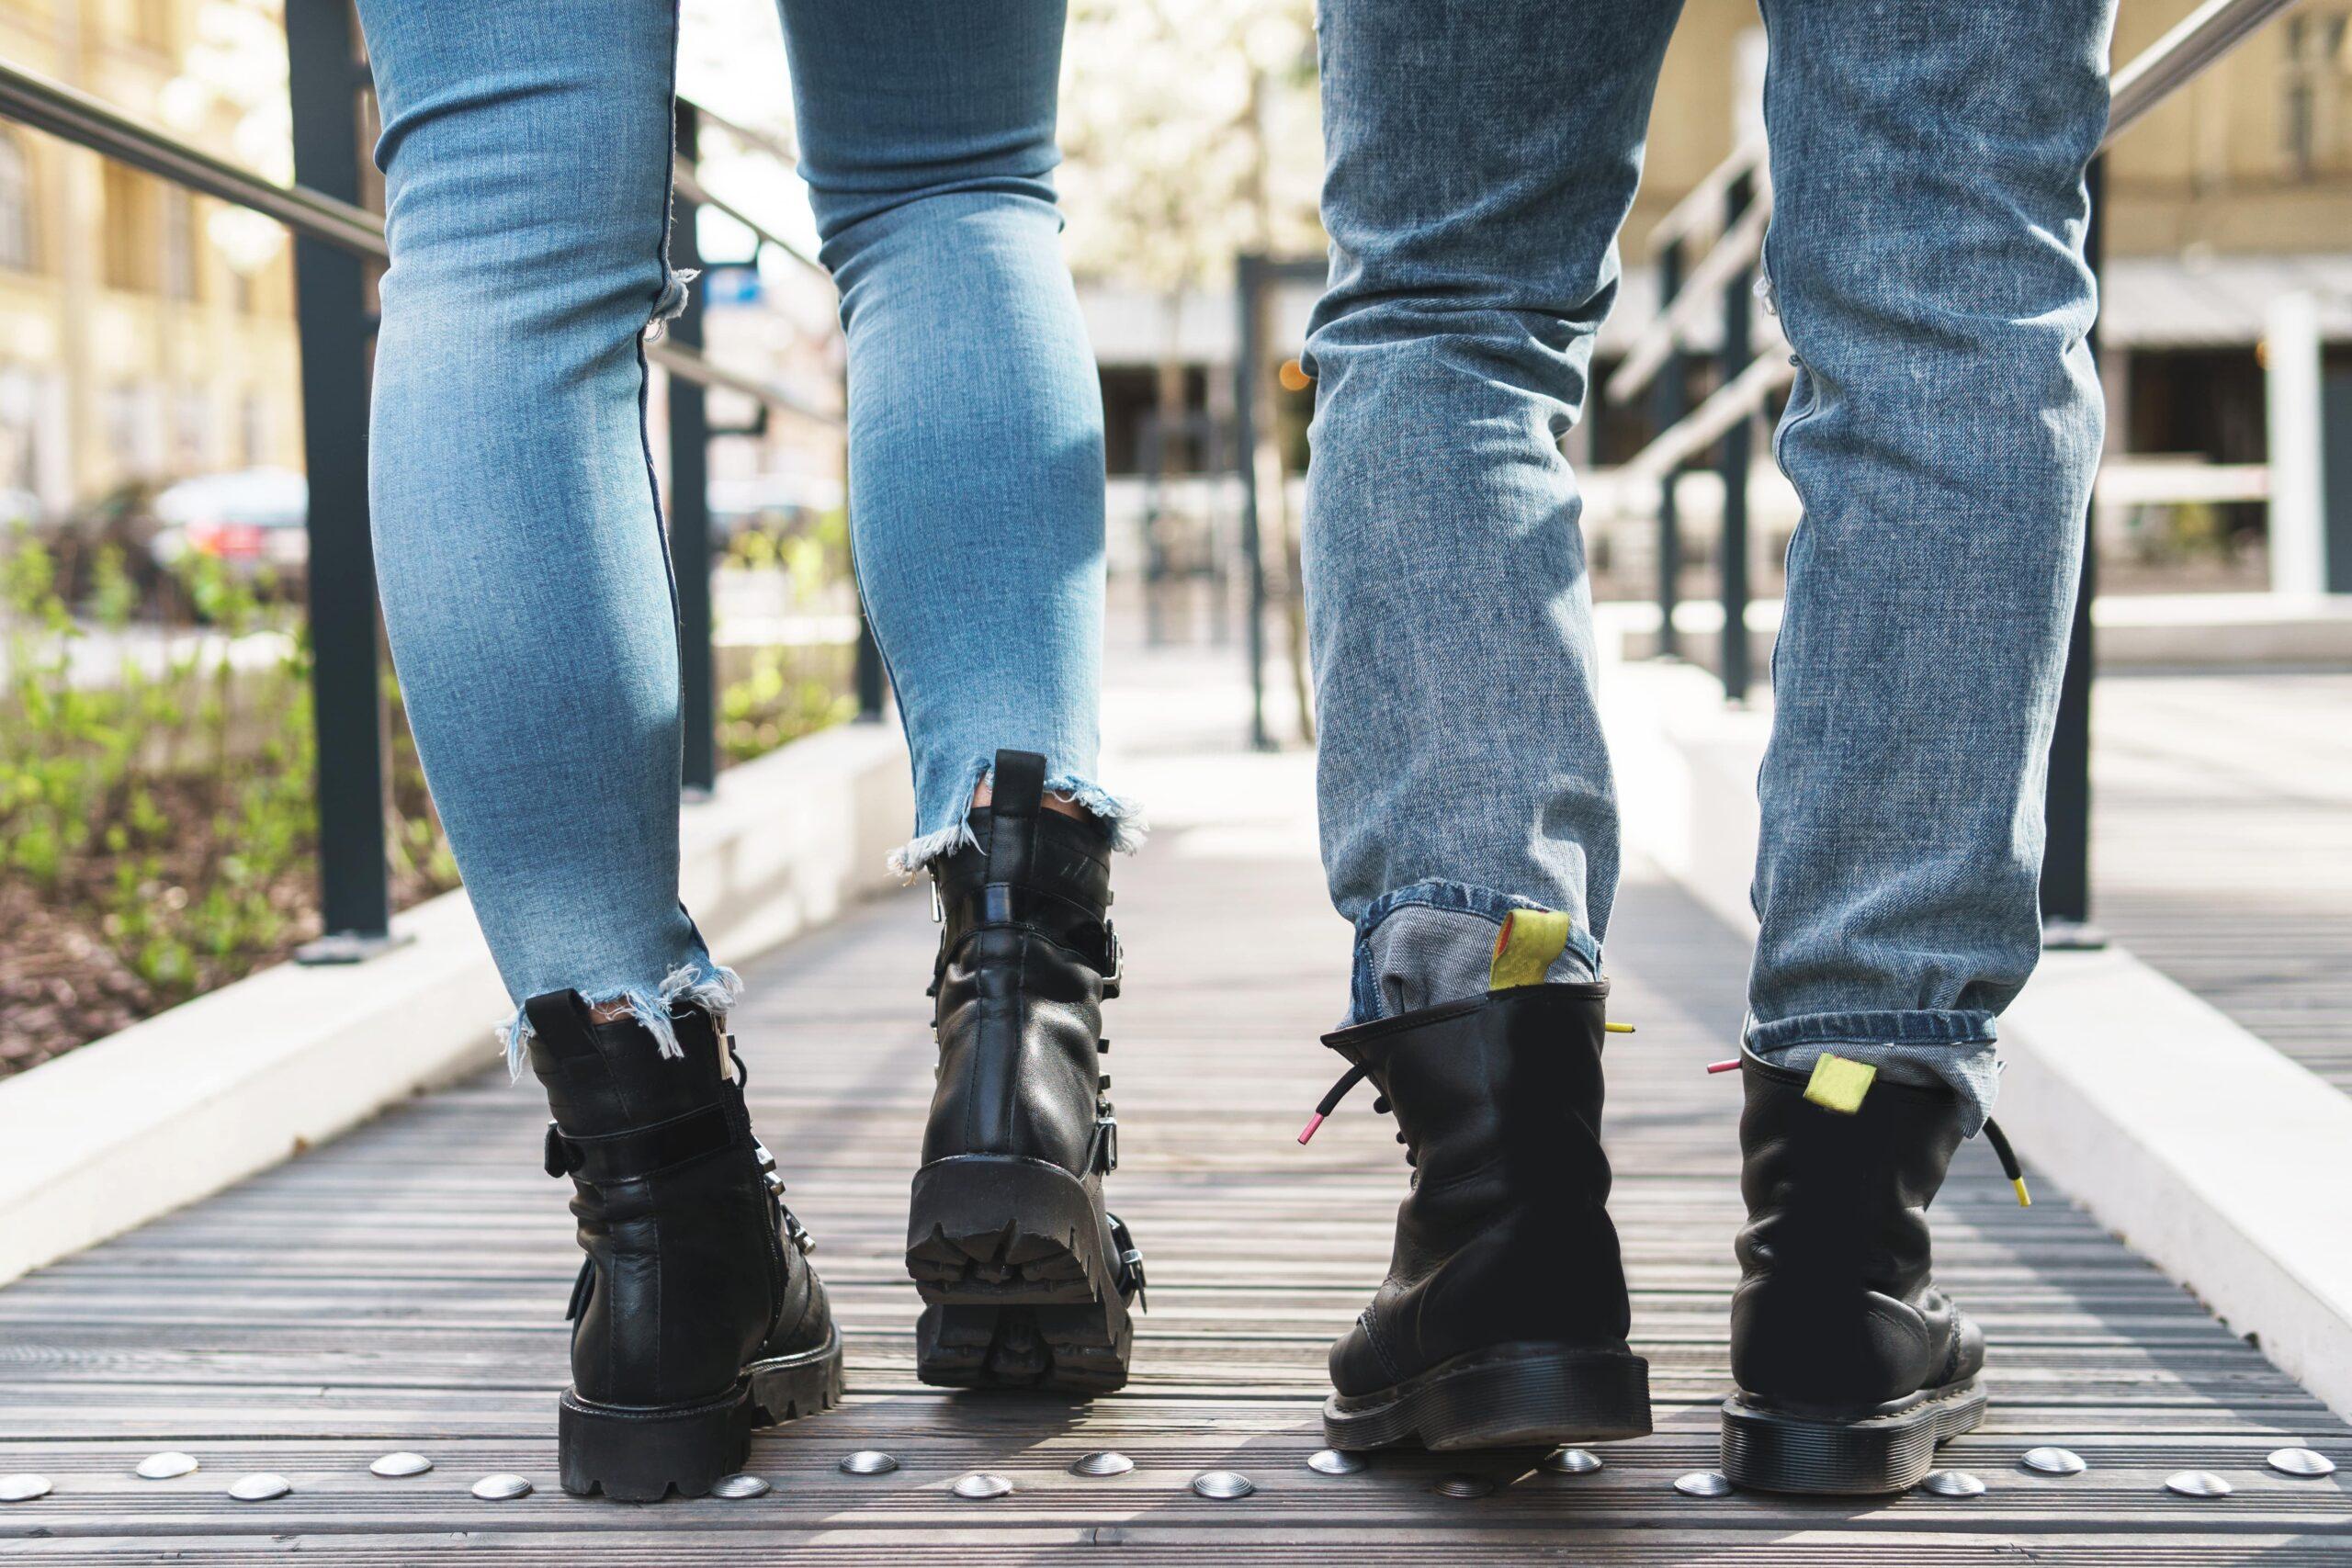 How to Wear Black Boots with Jeans: 8 Amazing Outfit Ideas